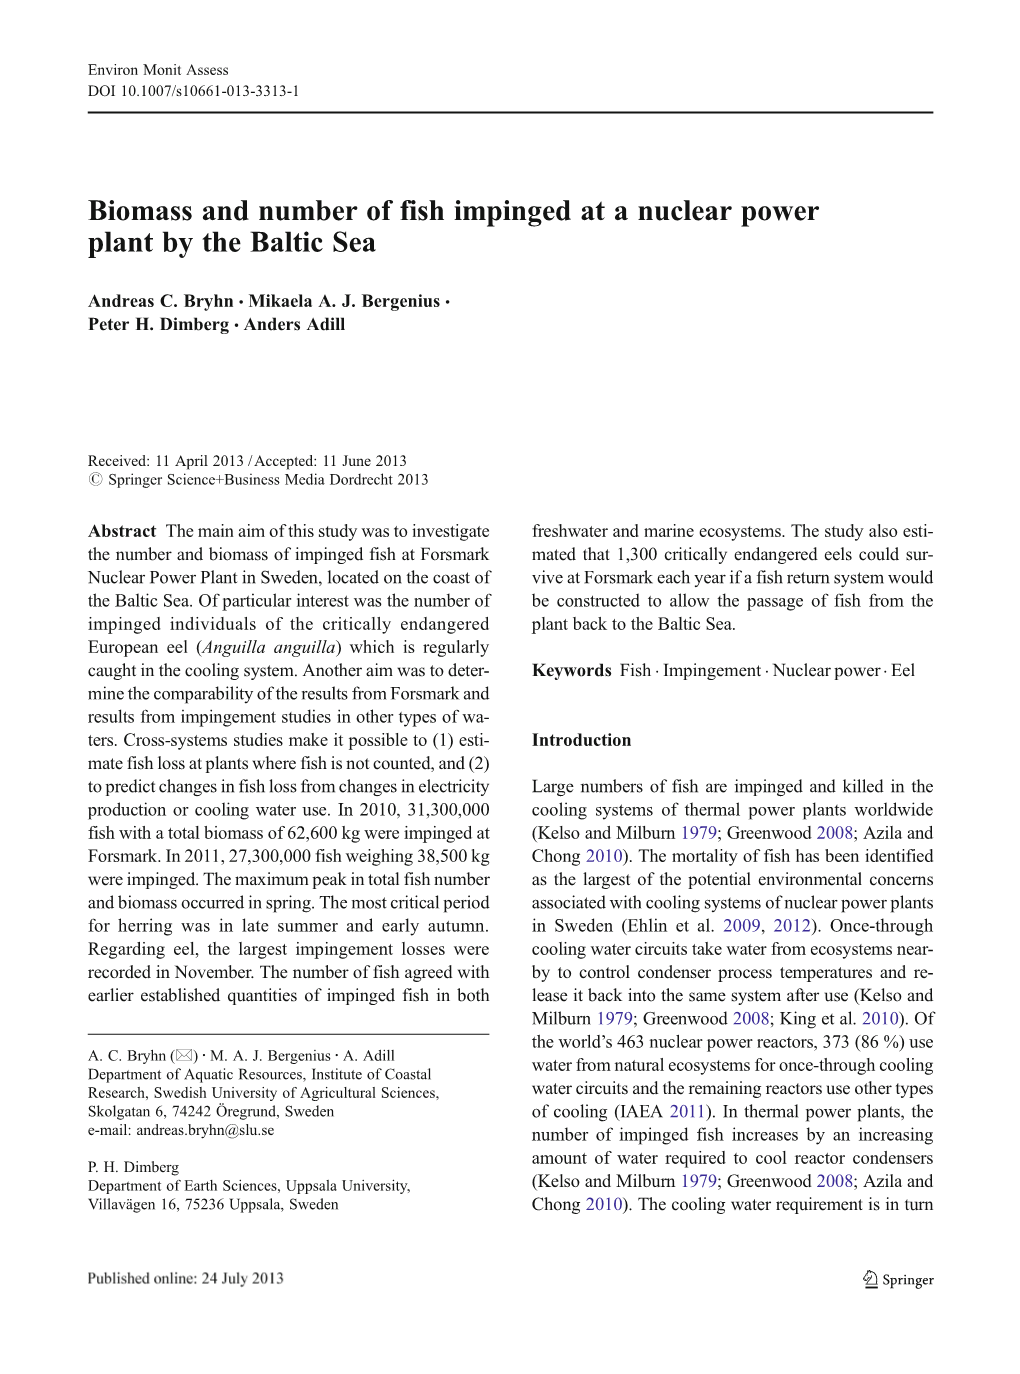 Biomass and Number of Fish Impinged at a Nuclear Power Plant by the Baltic Sea